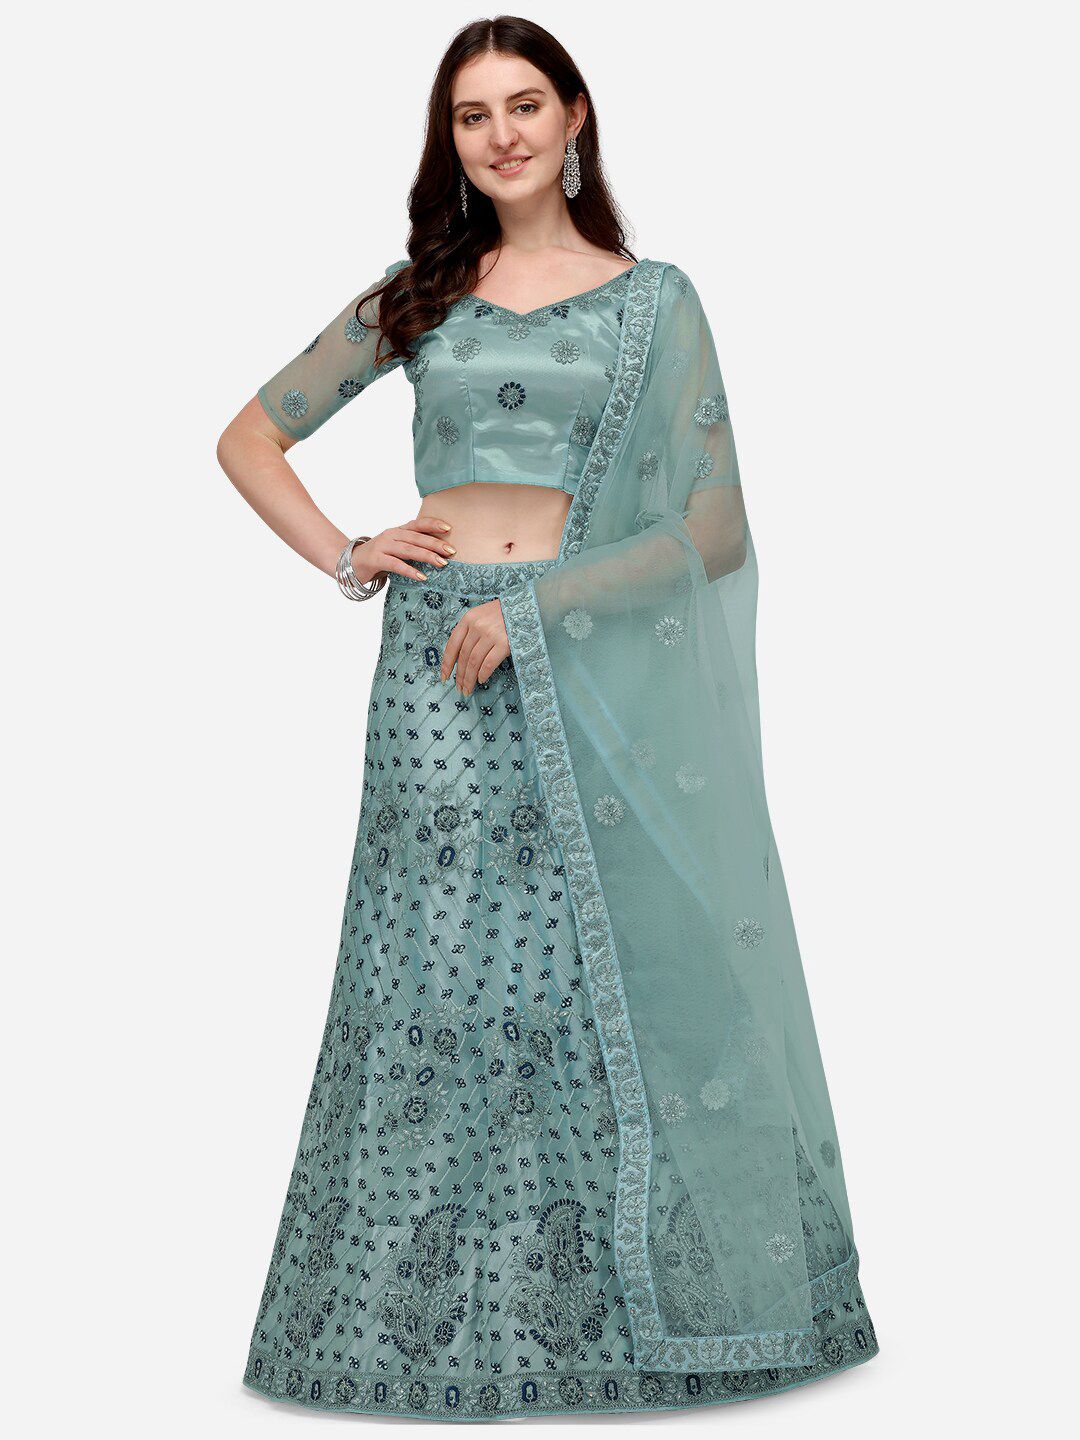 VRSALES Turquoise Blue & Silver-Toned Embroidered Semi-Stitched Lehenga & Unstitched Blouse With Dupatta Price in India